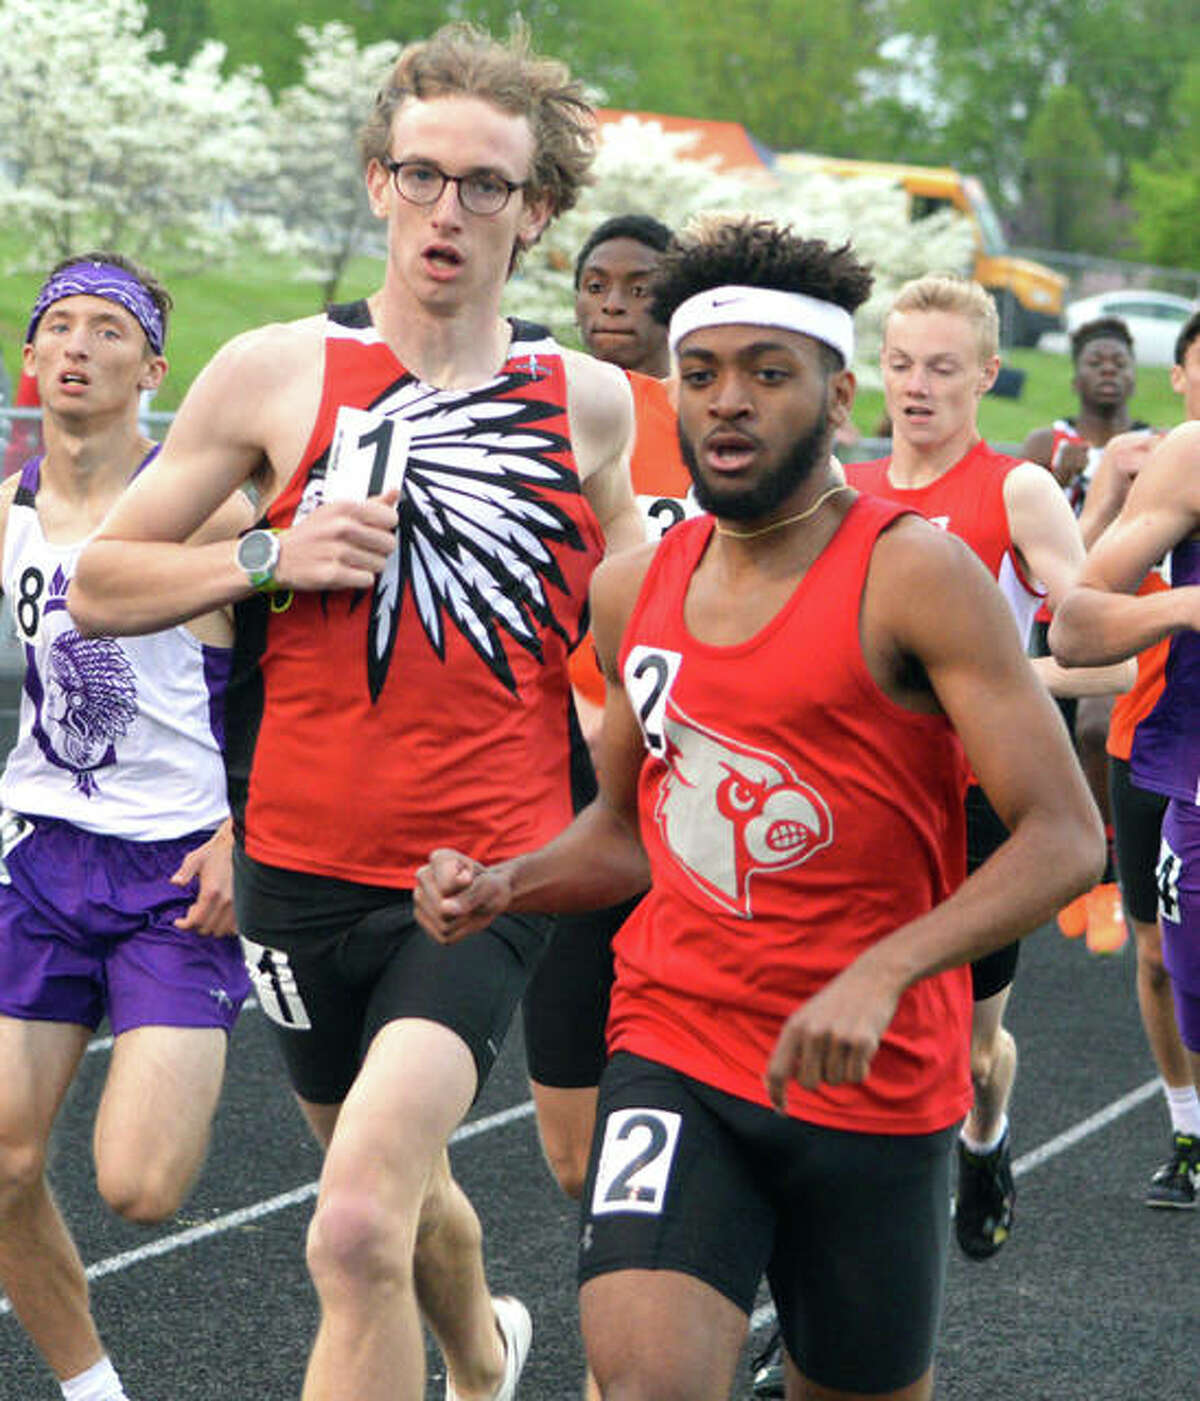 Granite City’s Andrew O’Keefe (left) and Alton’s Cassius Havis run side-by-side in the 800 meters at the 2019 Madison County Large-Schools Track Meet at Troy.